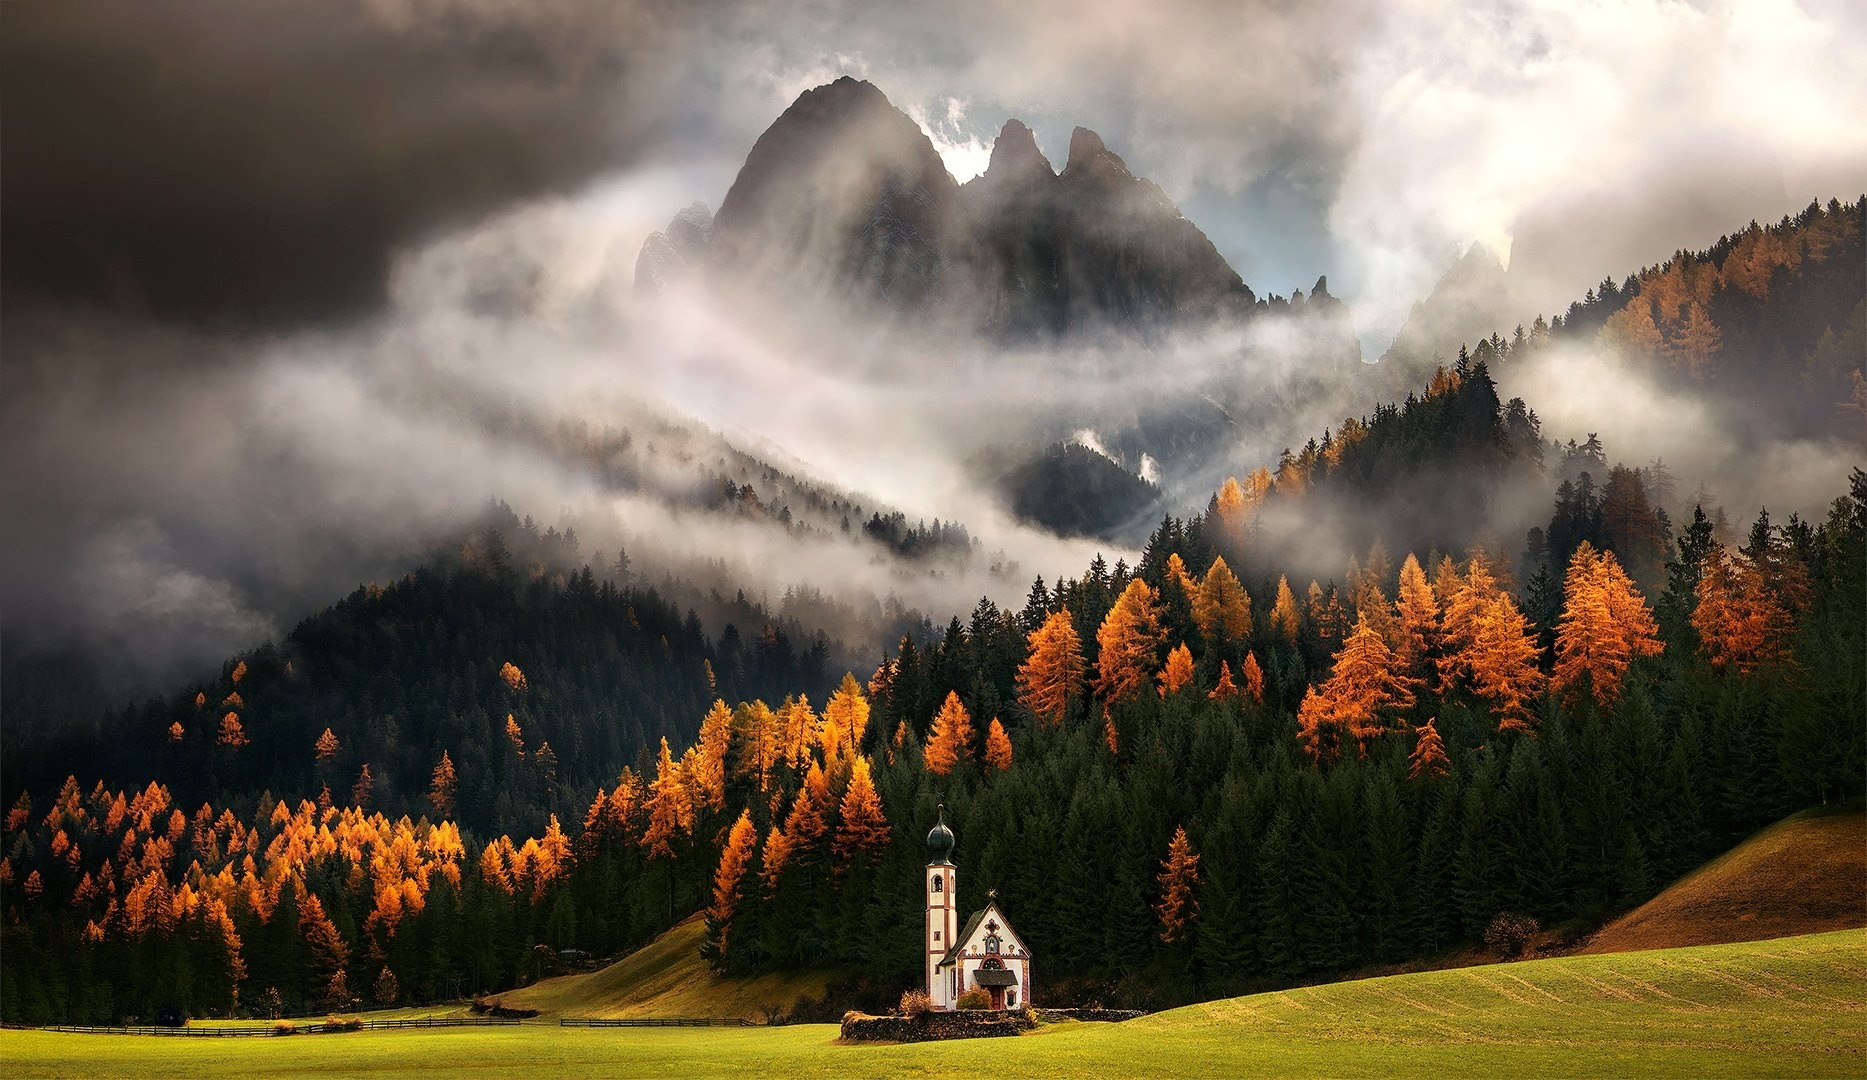 General 1867x1080 nature landscape mountains forest Italy fall clouds trees mist church hills grass field valley pine trees Max Rive